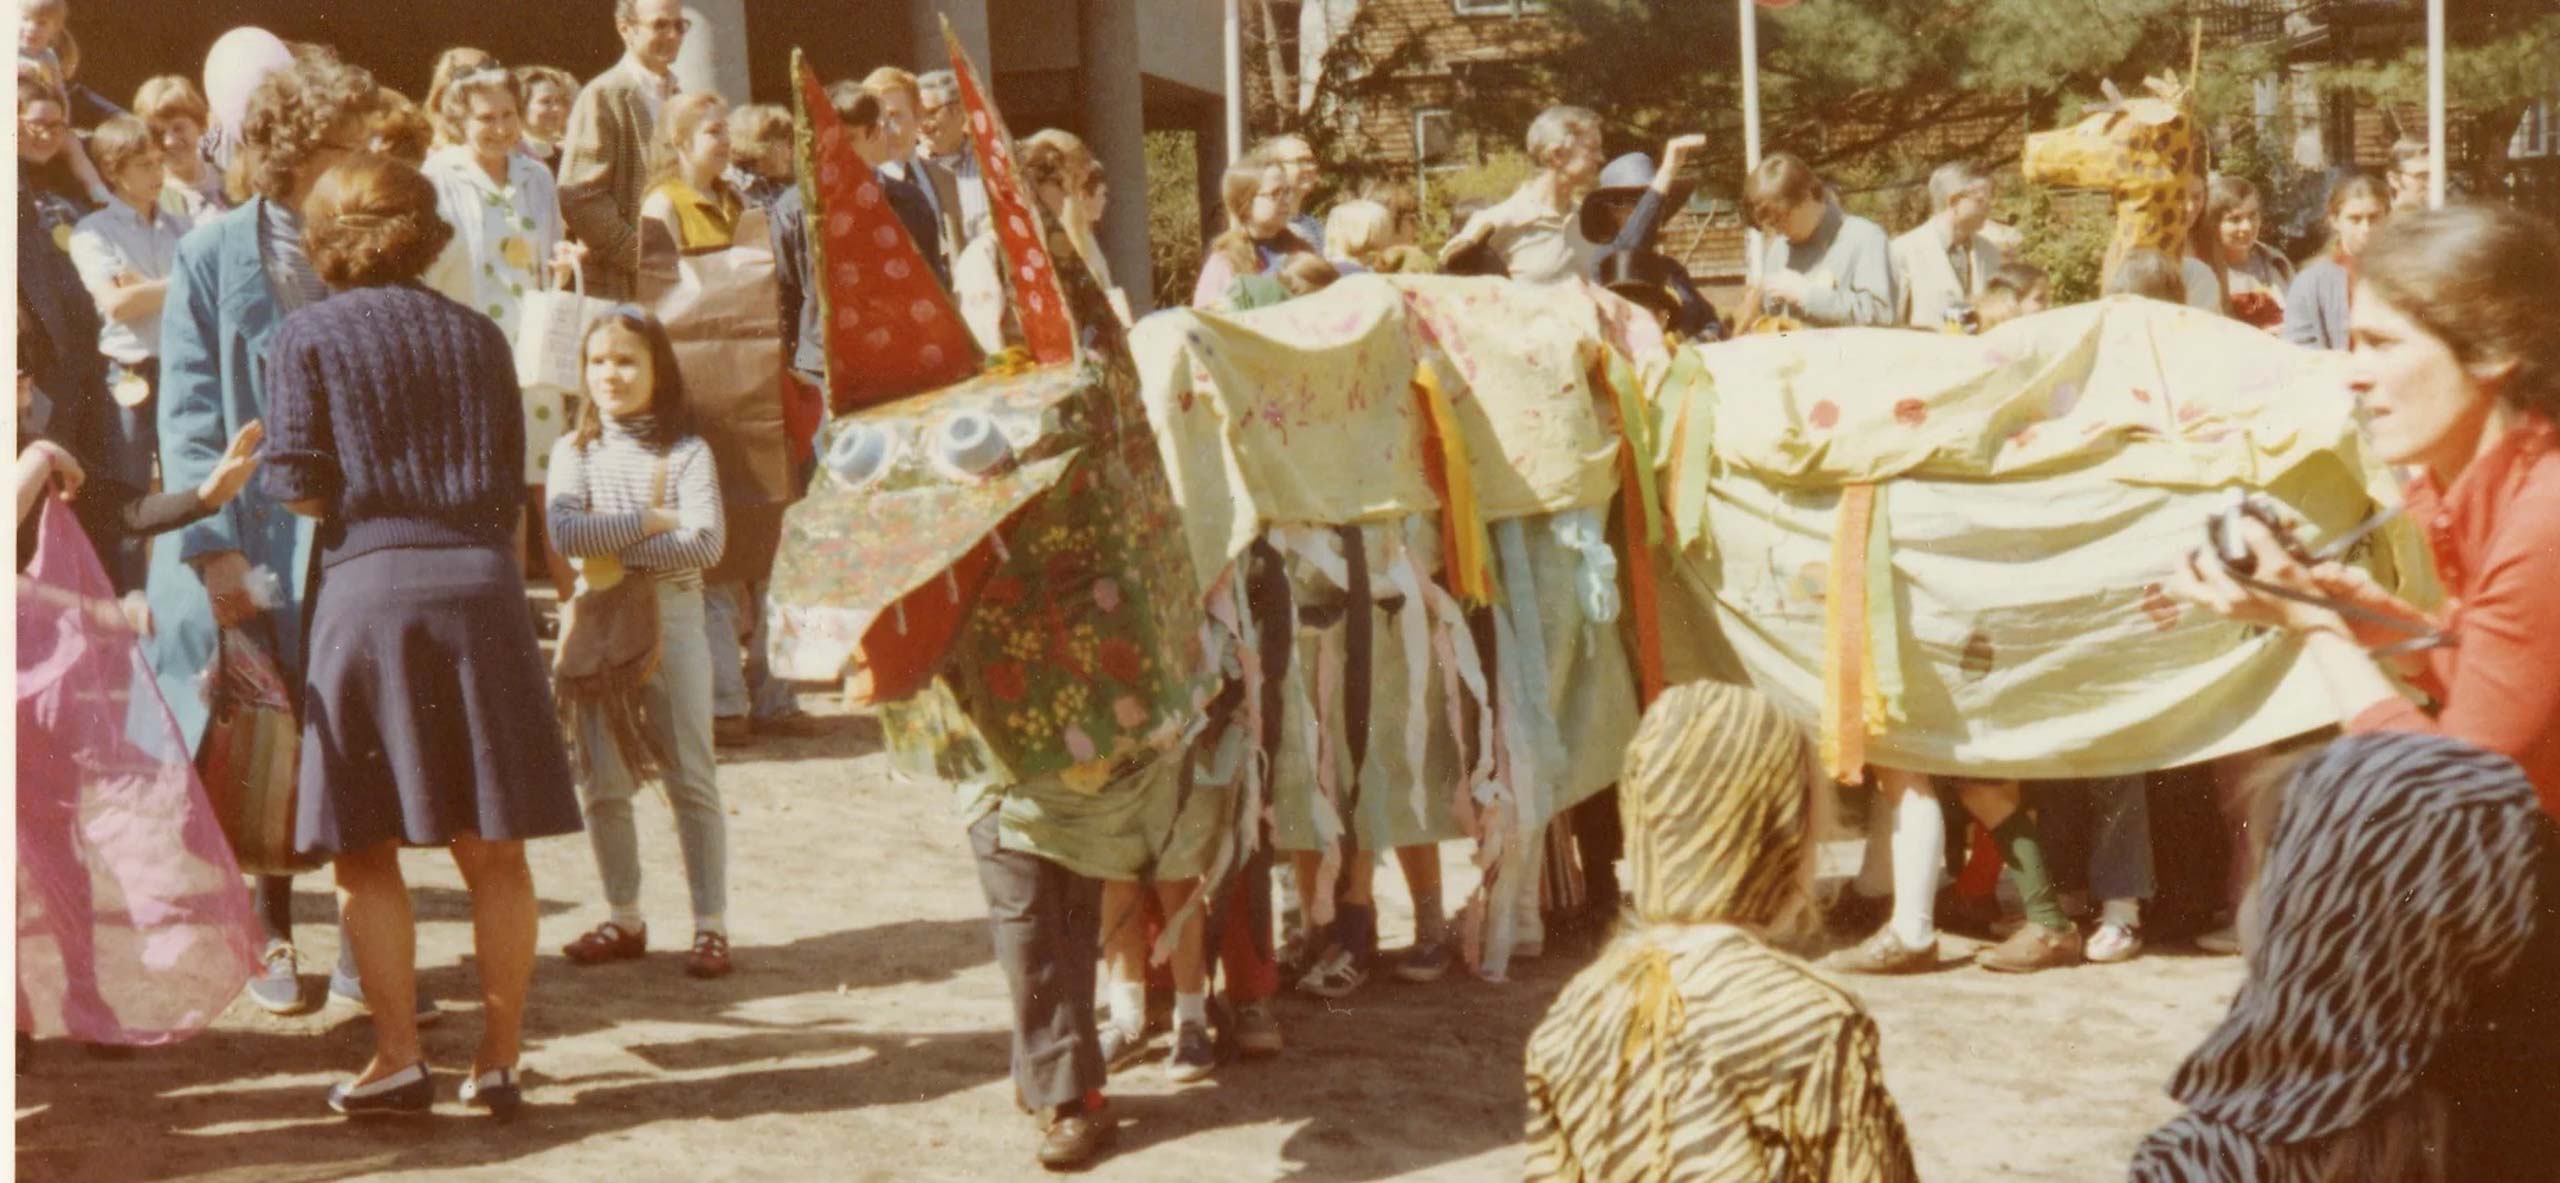 Vintage photo of large gathering with people in a long dragon creature costume.